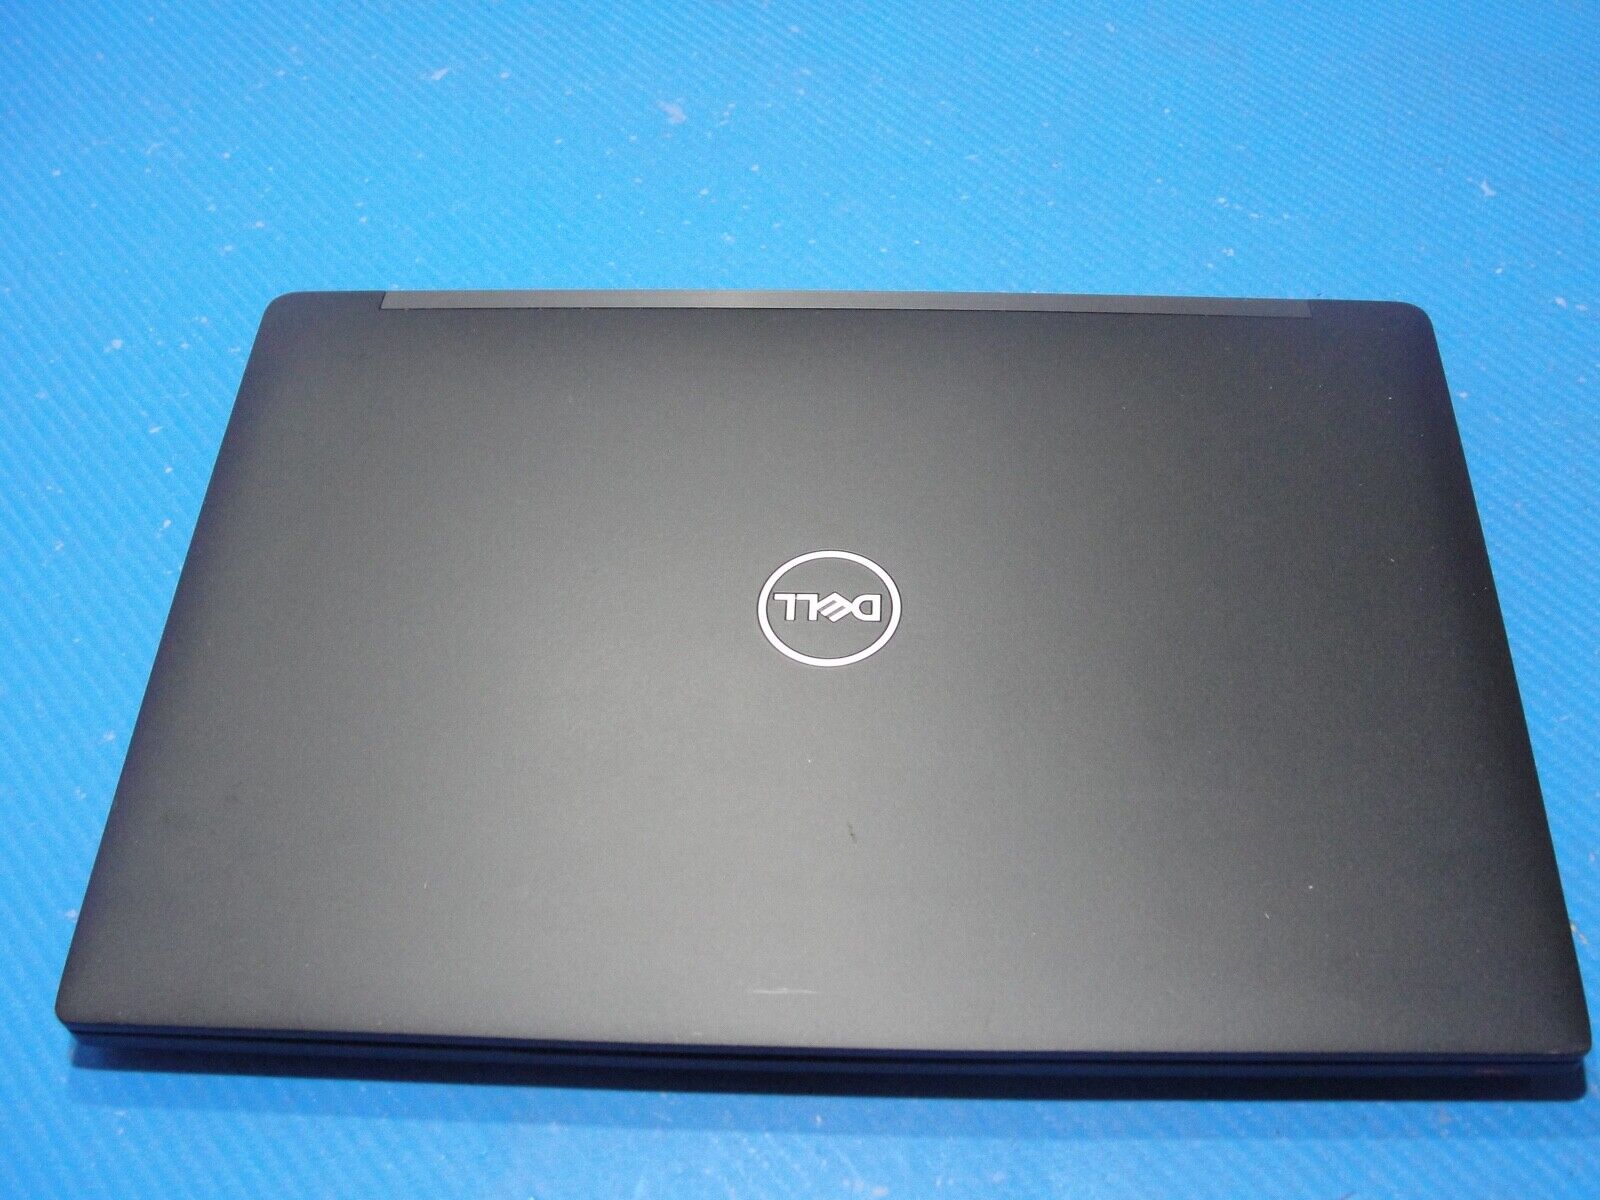 Works Great! Dell Latitude 7390 Intel i5-8350u 1.7GHZ 8GB 256GB SSD Dell Charger